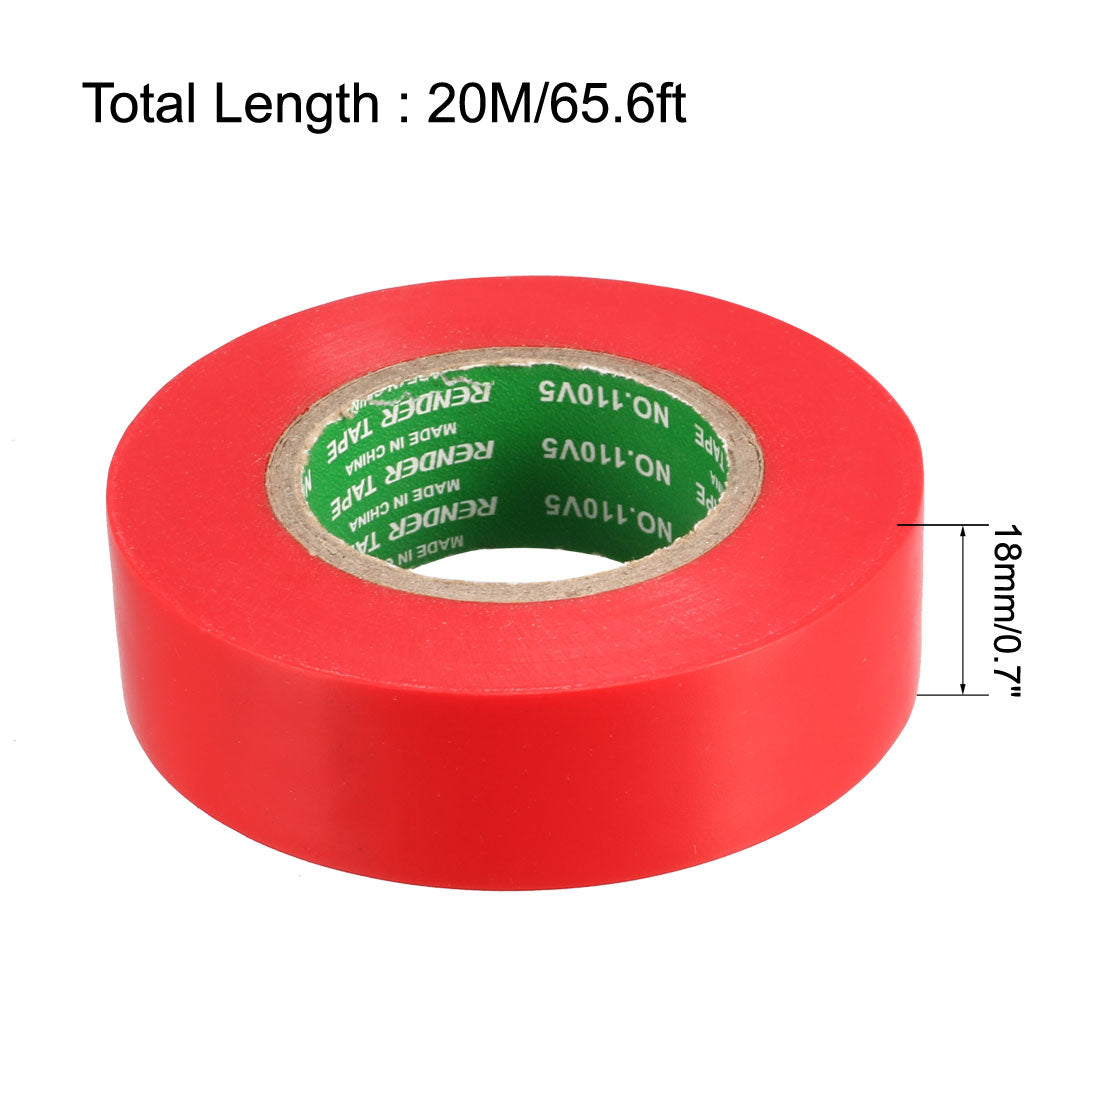 uxcell Uxcell Insulating Tape 18mm x20M x 0.1mm  PVC Electrical Tape Max. 600V Red 2pcs